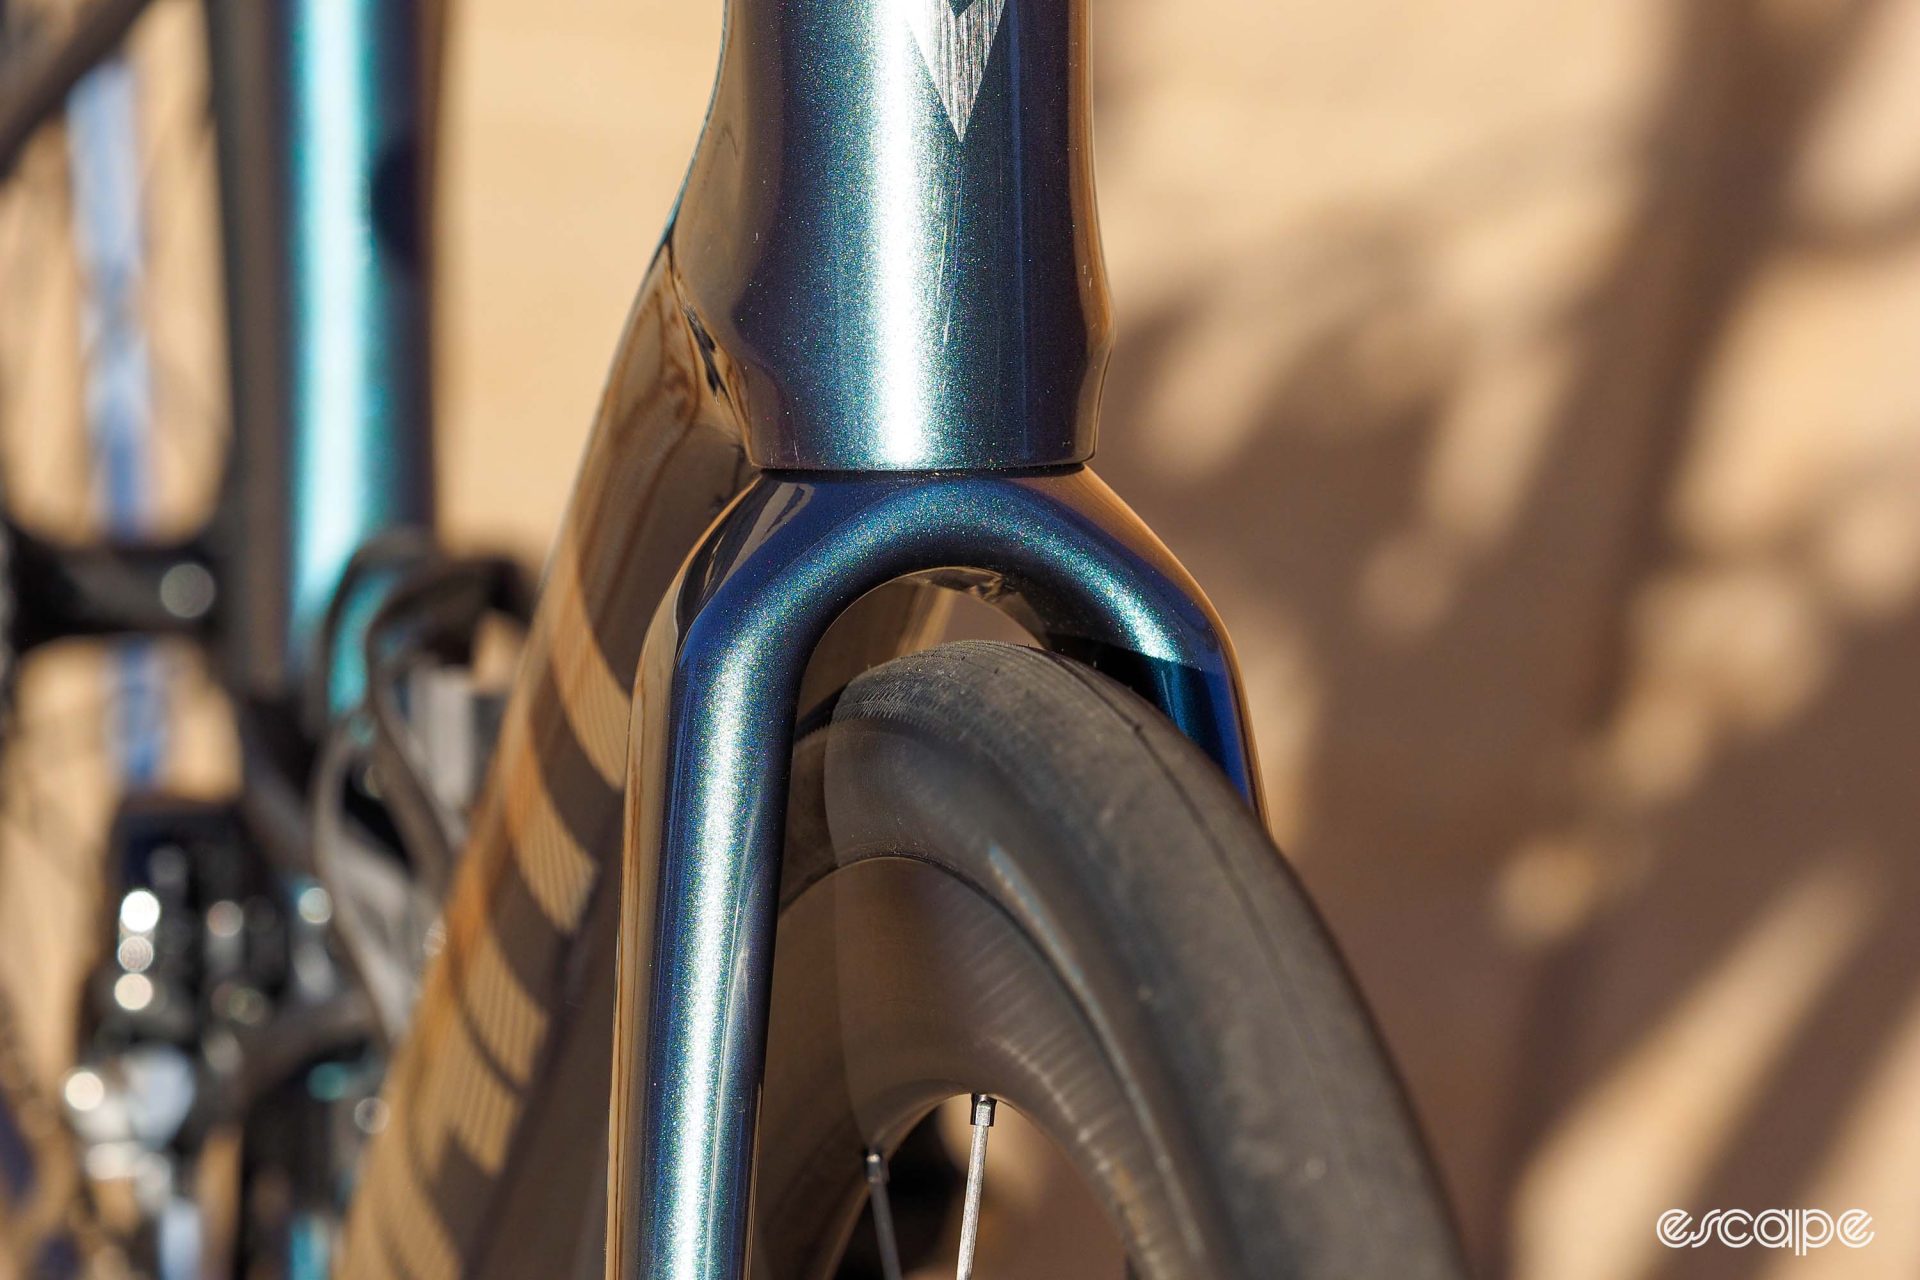 The fork crown shows generous tire clearance, even with 34 mm-wide tires.